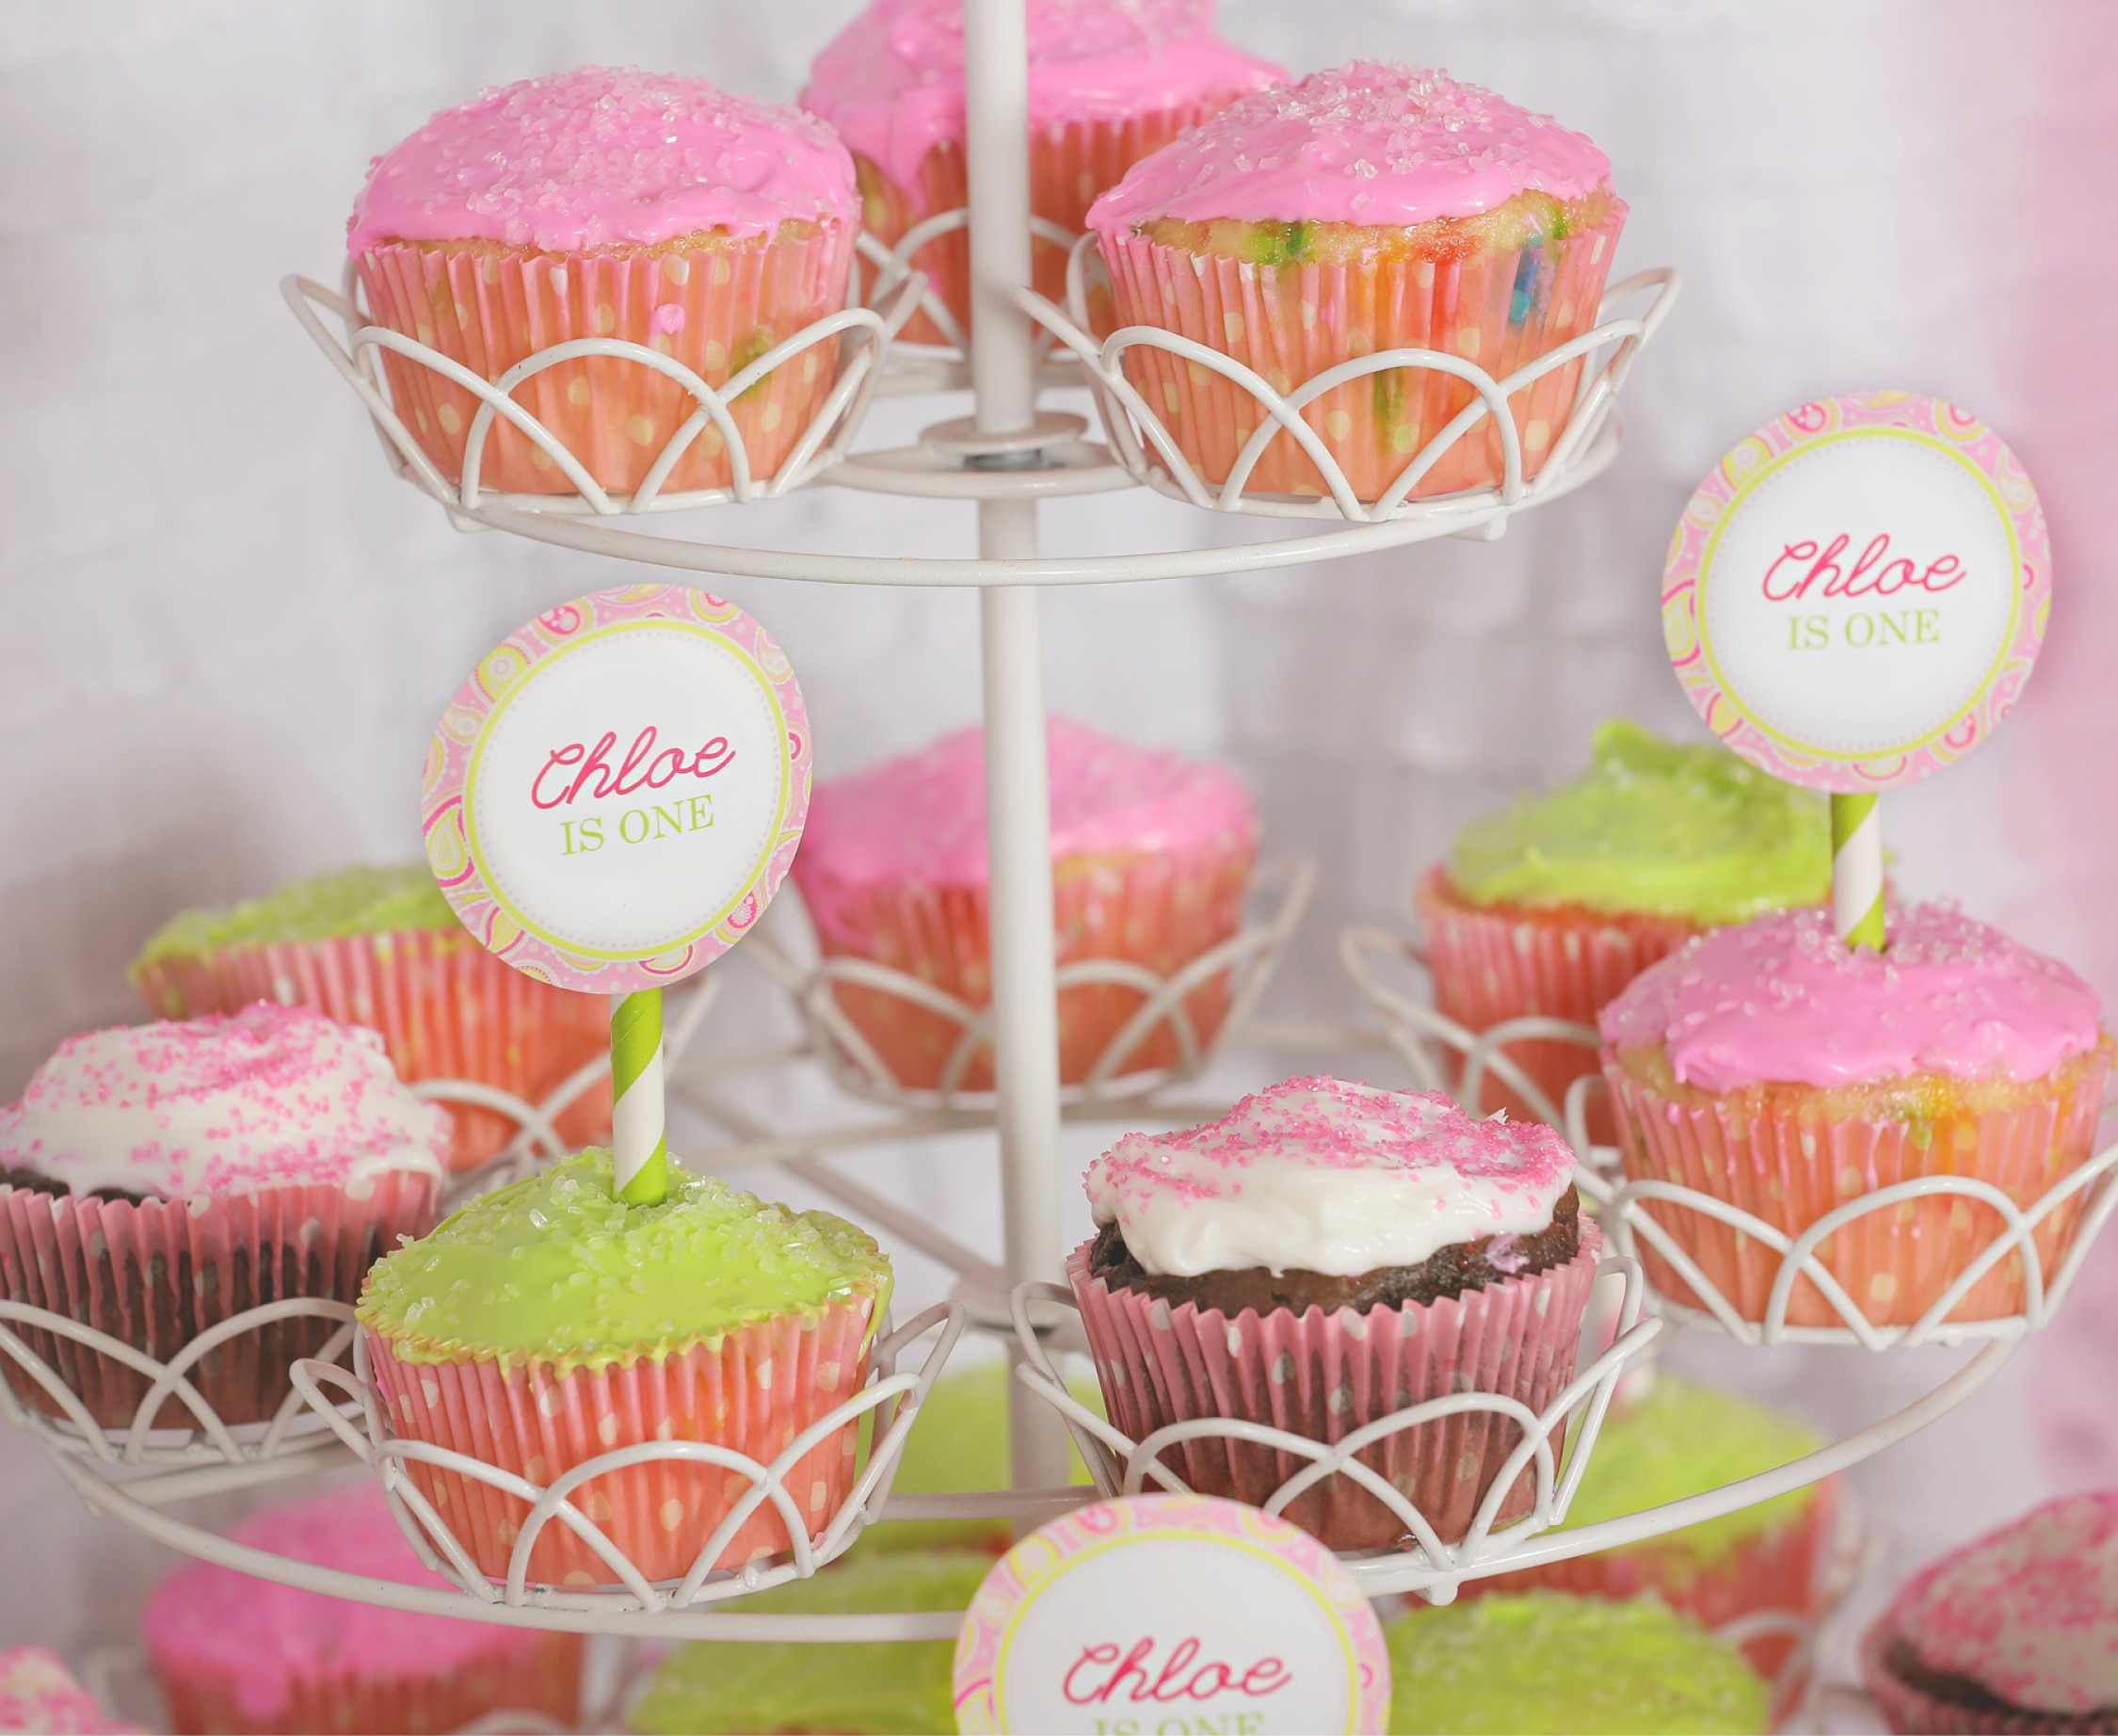 Cupcake Ideas For Birthday
 A Cupcake Themed 1st Birthday party with Paisley and Polka